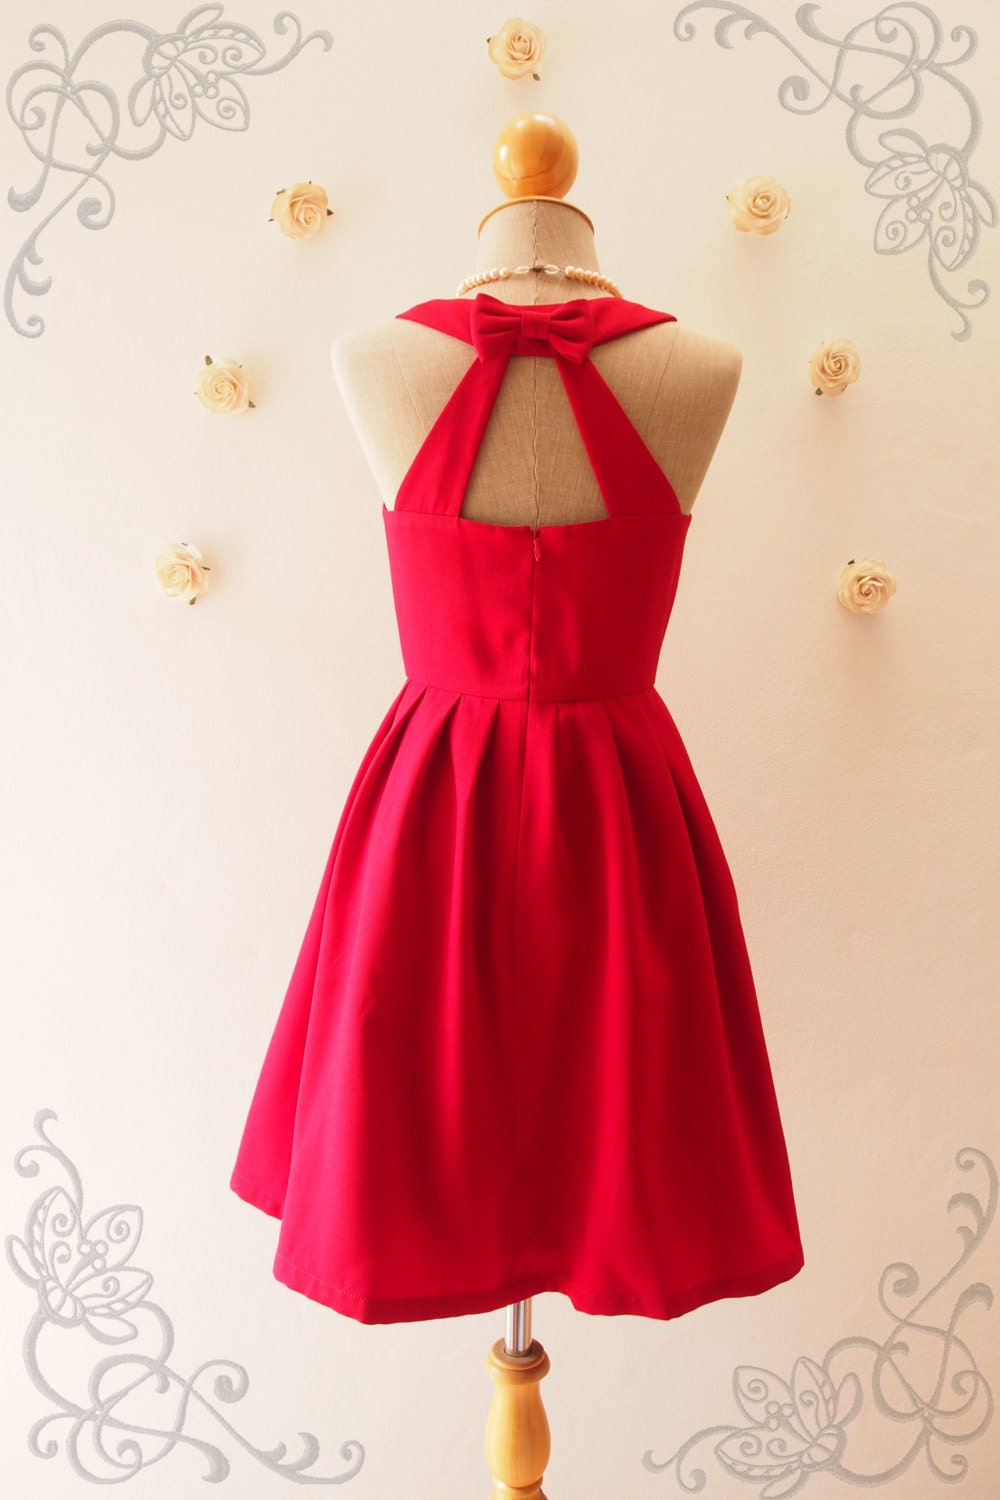 Red Bridesmaid Dress Summer Fashion Vintage Style Backless Cutie Sundress Red Party - Love Potion